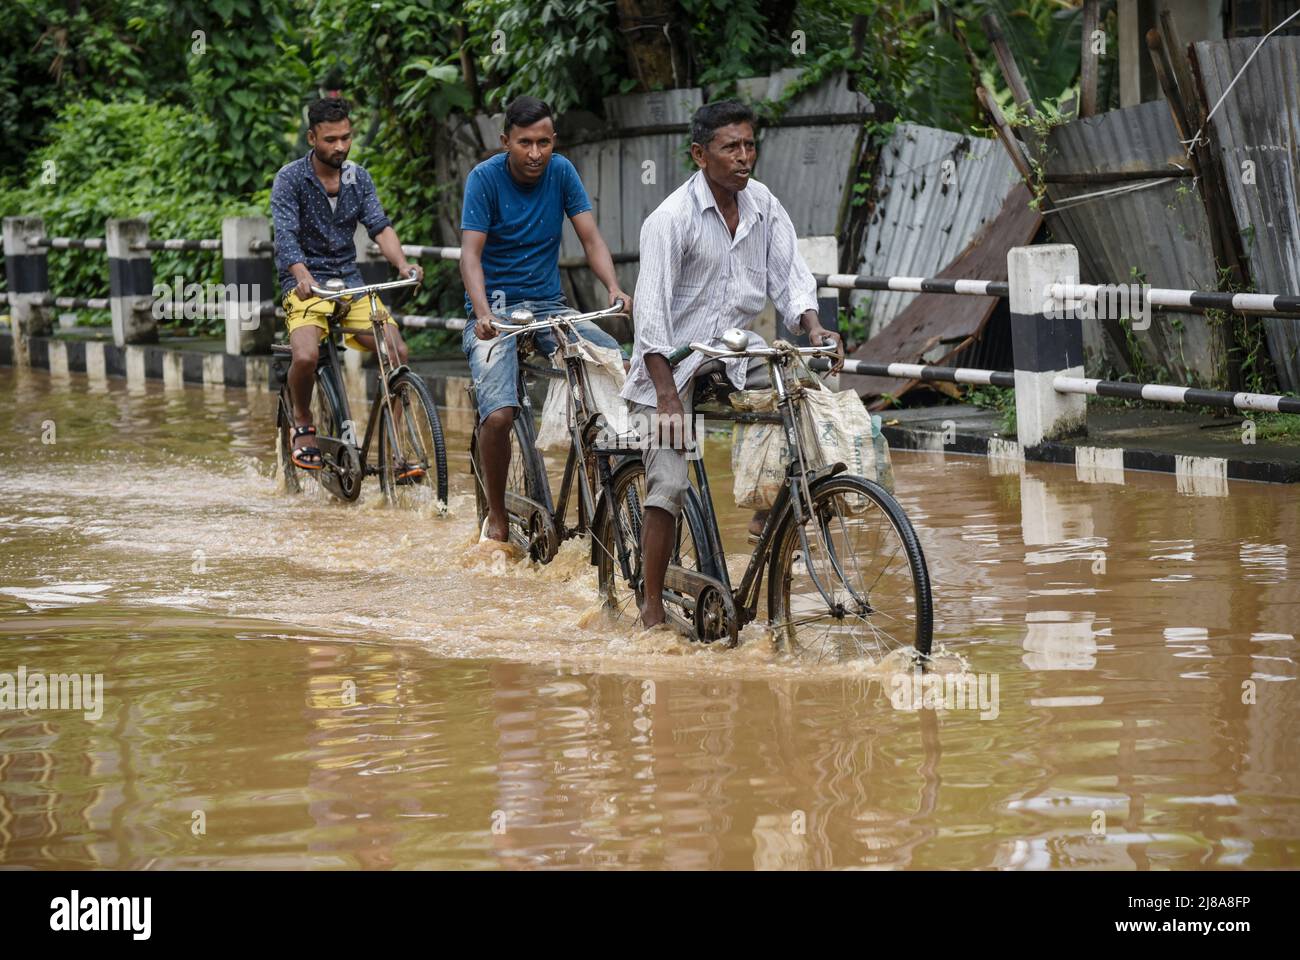 Commuters Make Their Way On A Waterlogged Street After A Heavy Rainfall In Guwahati India On 14